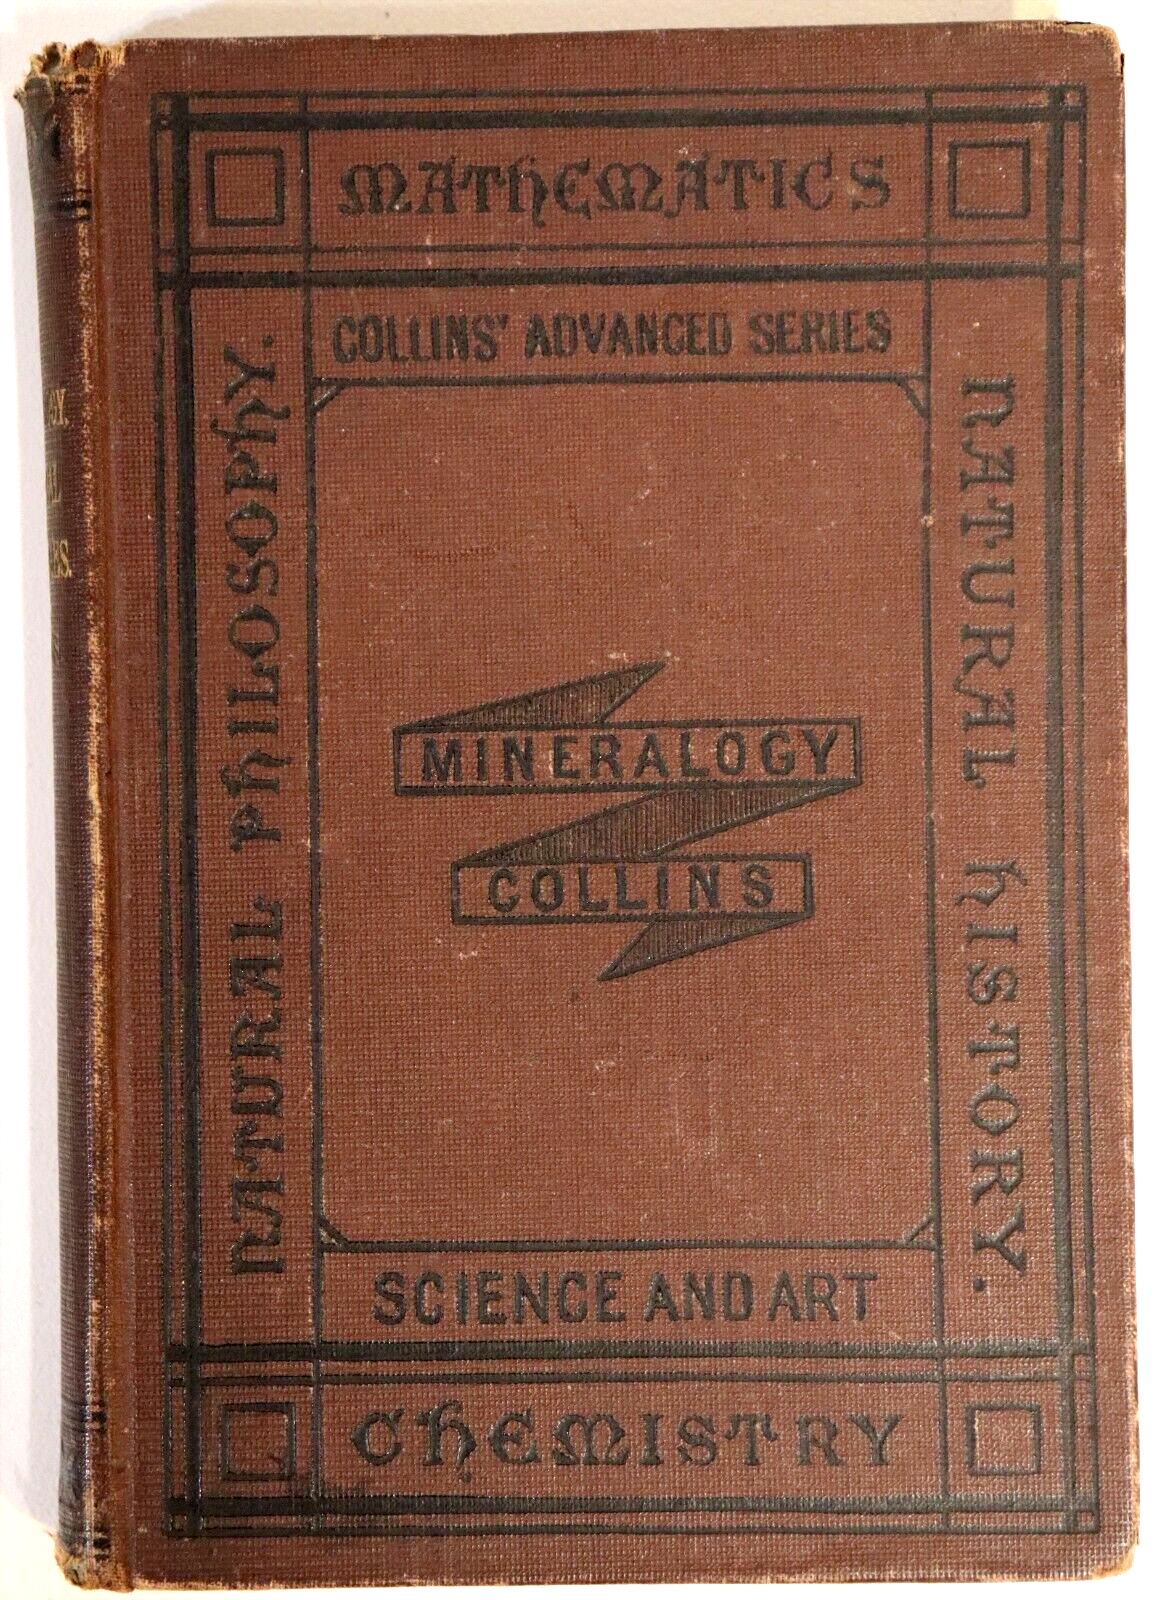 The General Principles Of Mineralogy by JH Collins - 1878 - Antique Science Book